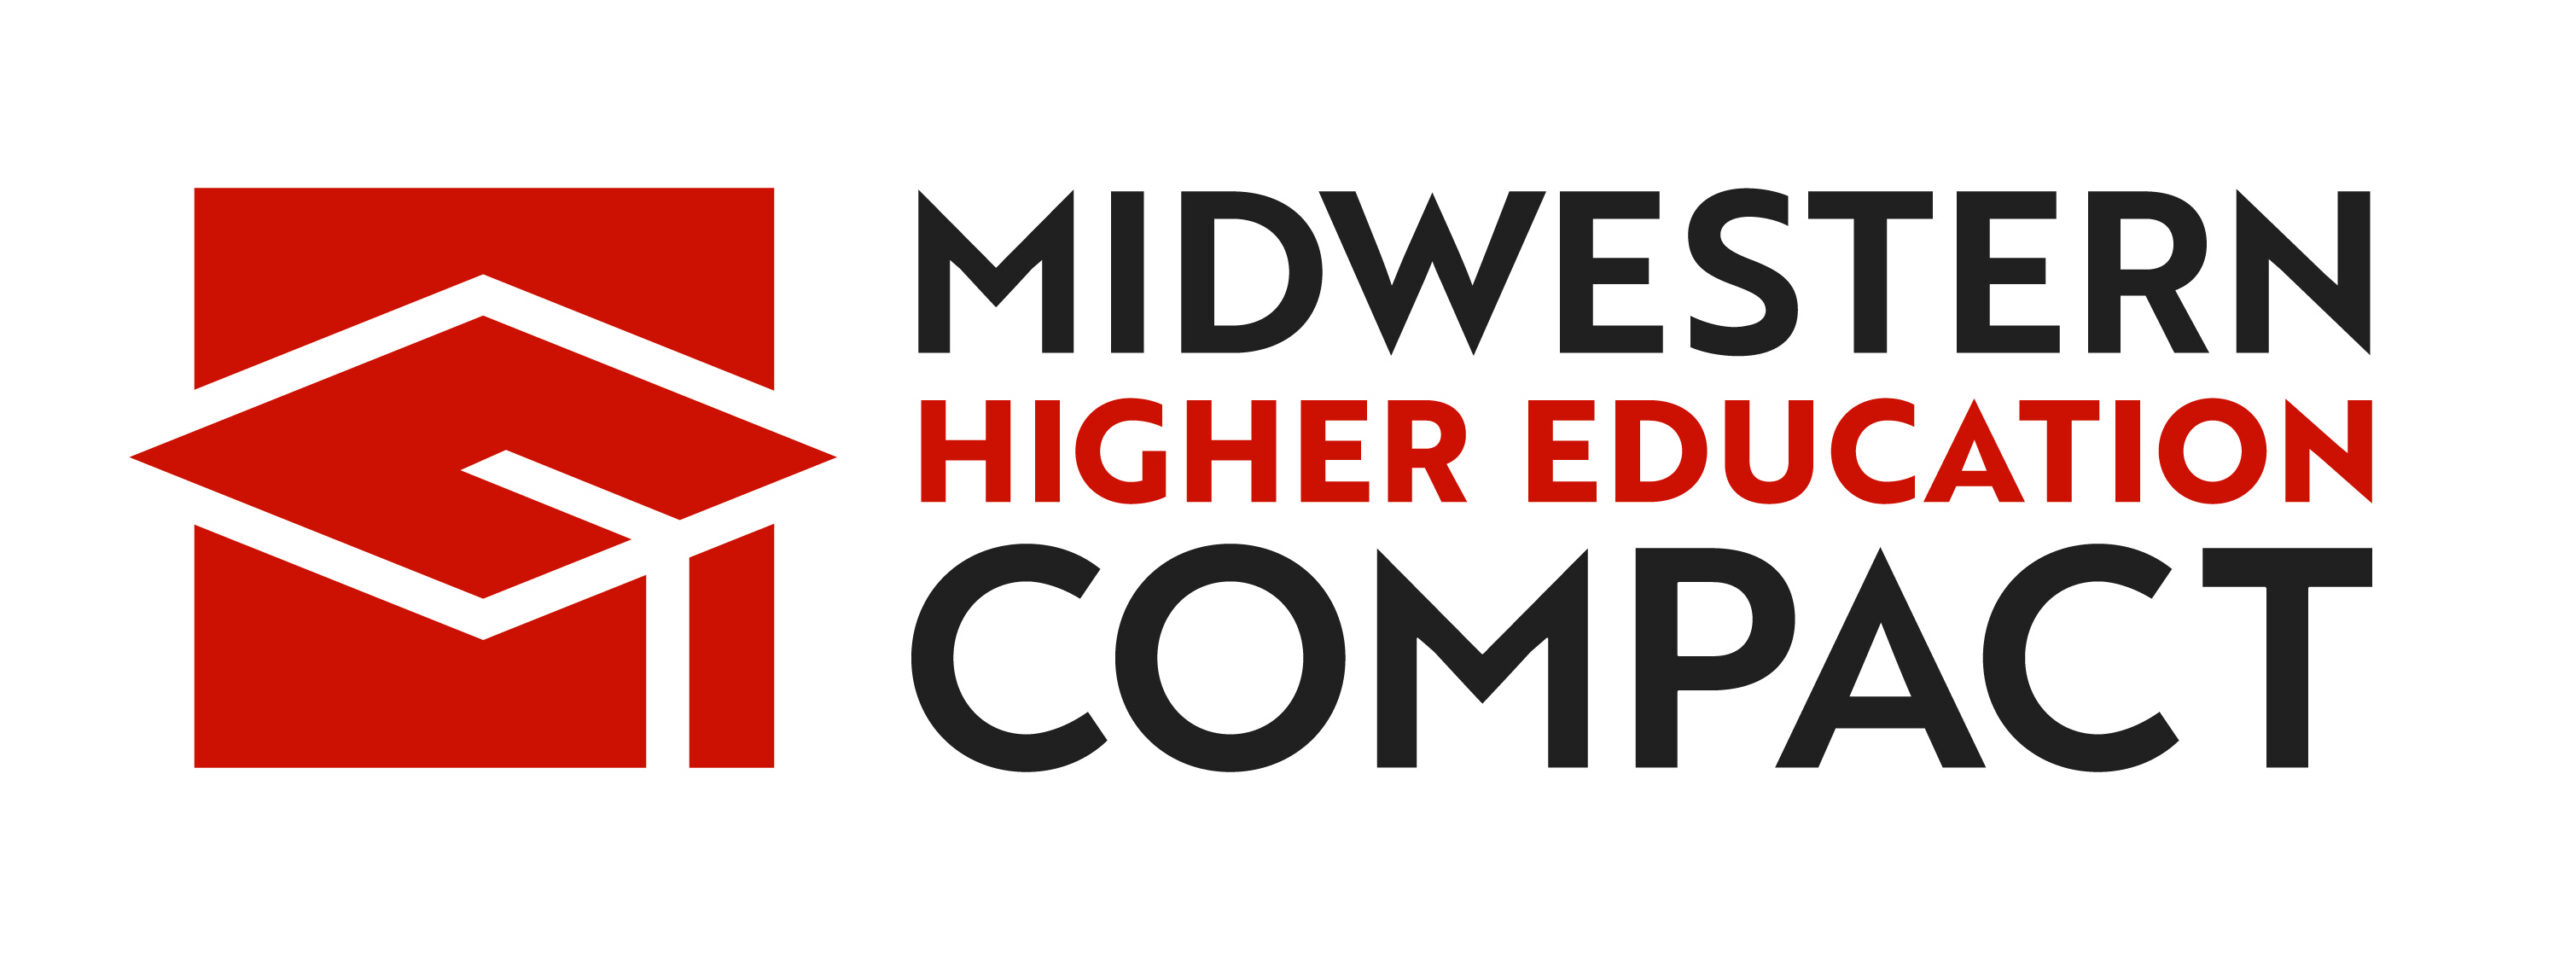 Midwestern Higher Education Compact